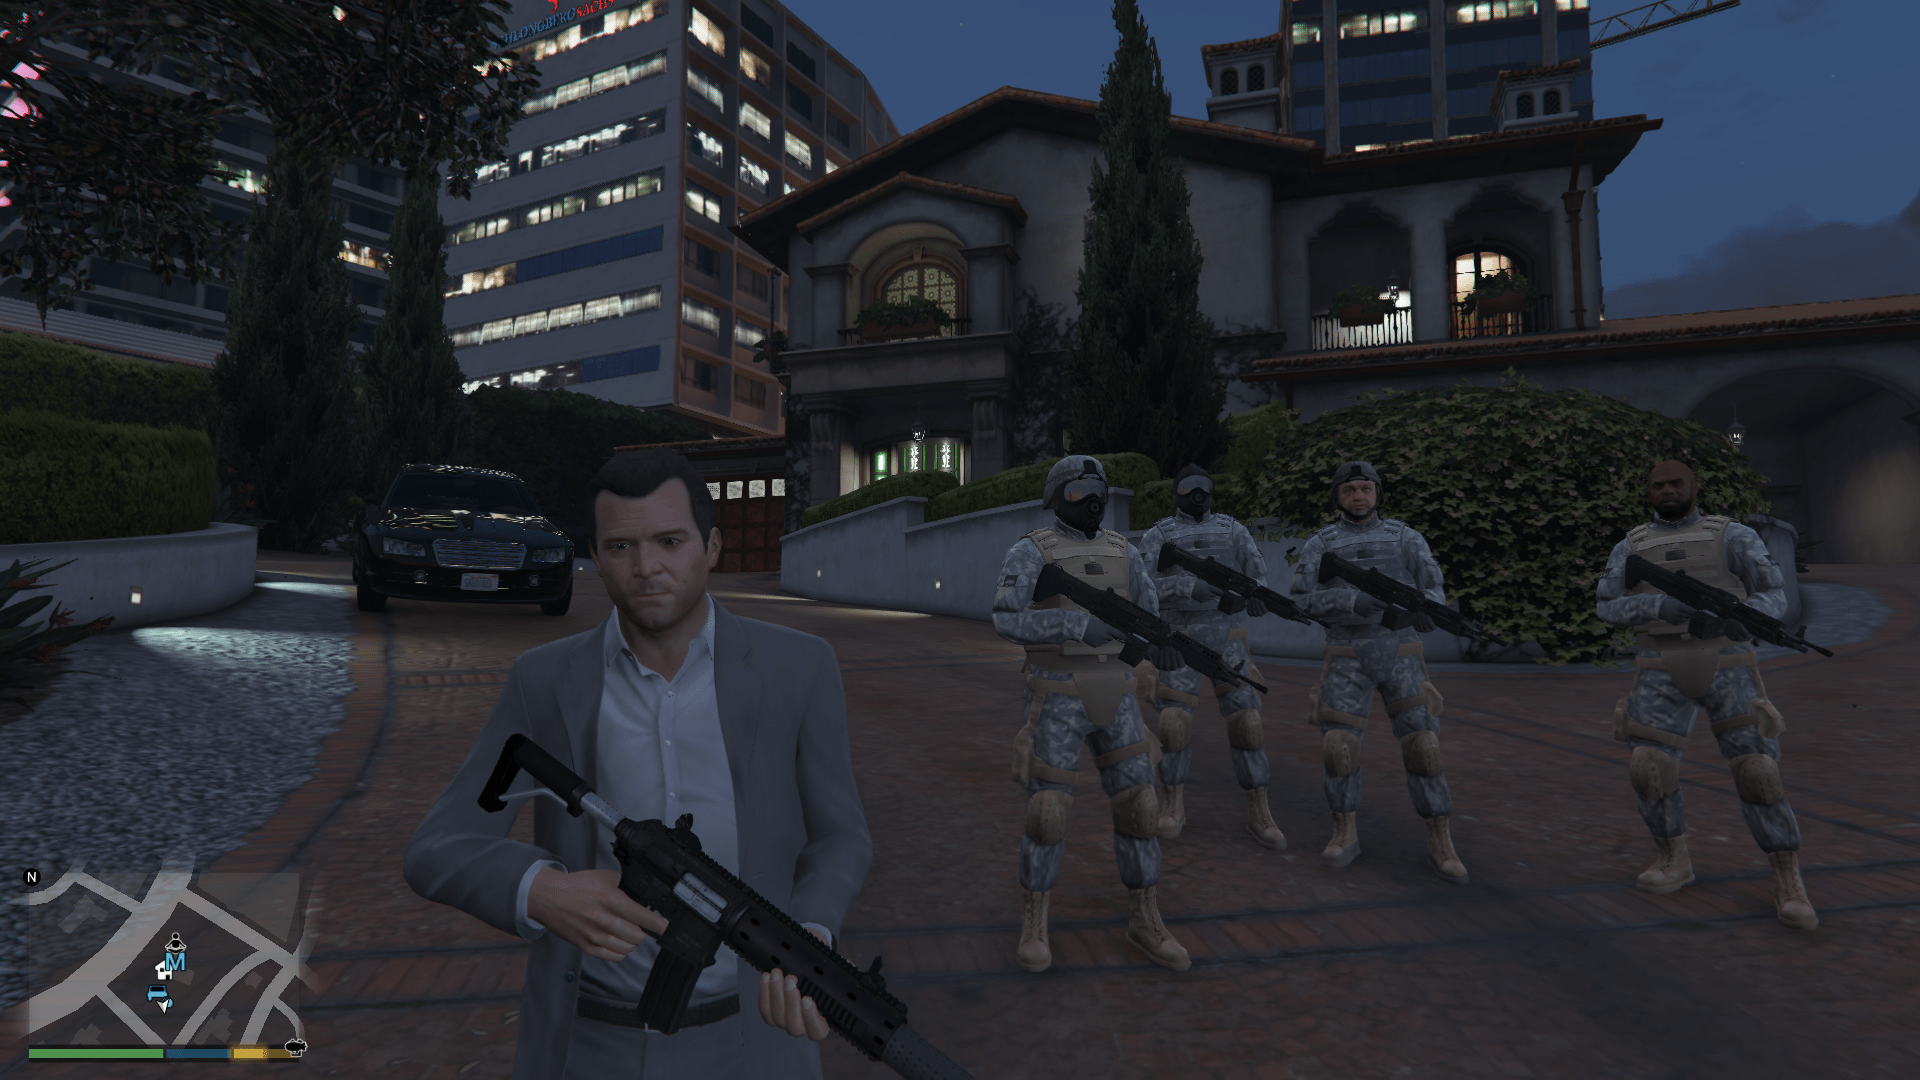 Personal Army (Active bodyguards squads and teams) [.NET] 2.2